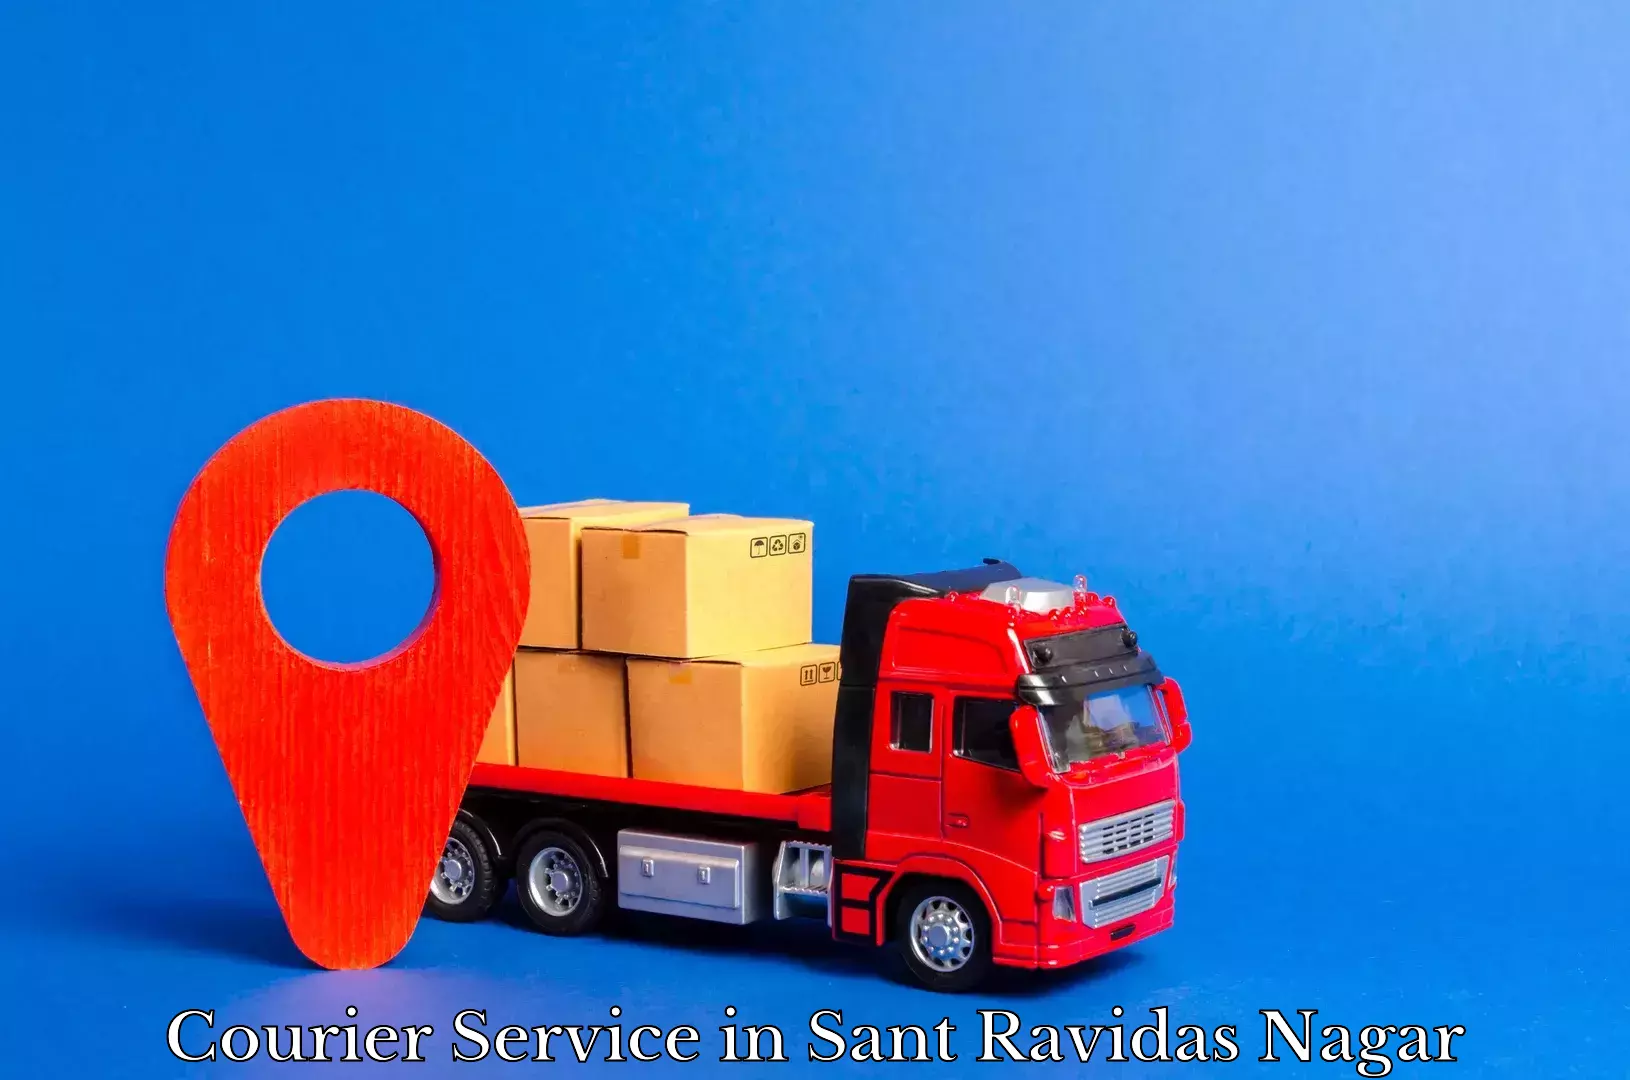 Supply chain delivery in Sant Ravidas Nagar